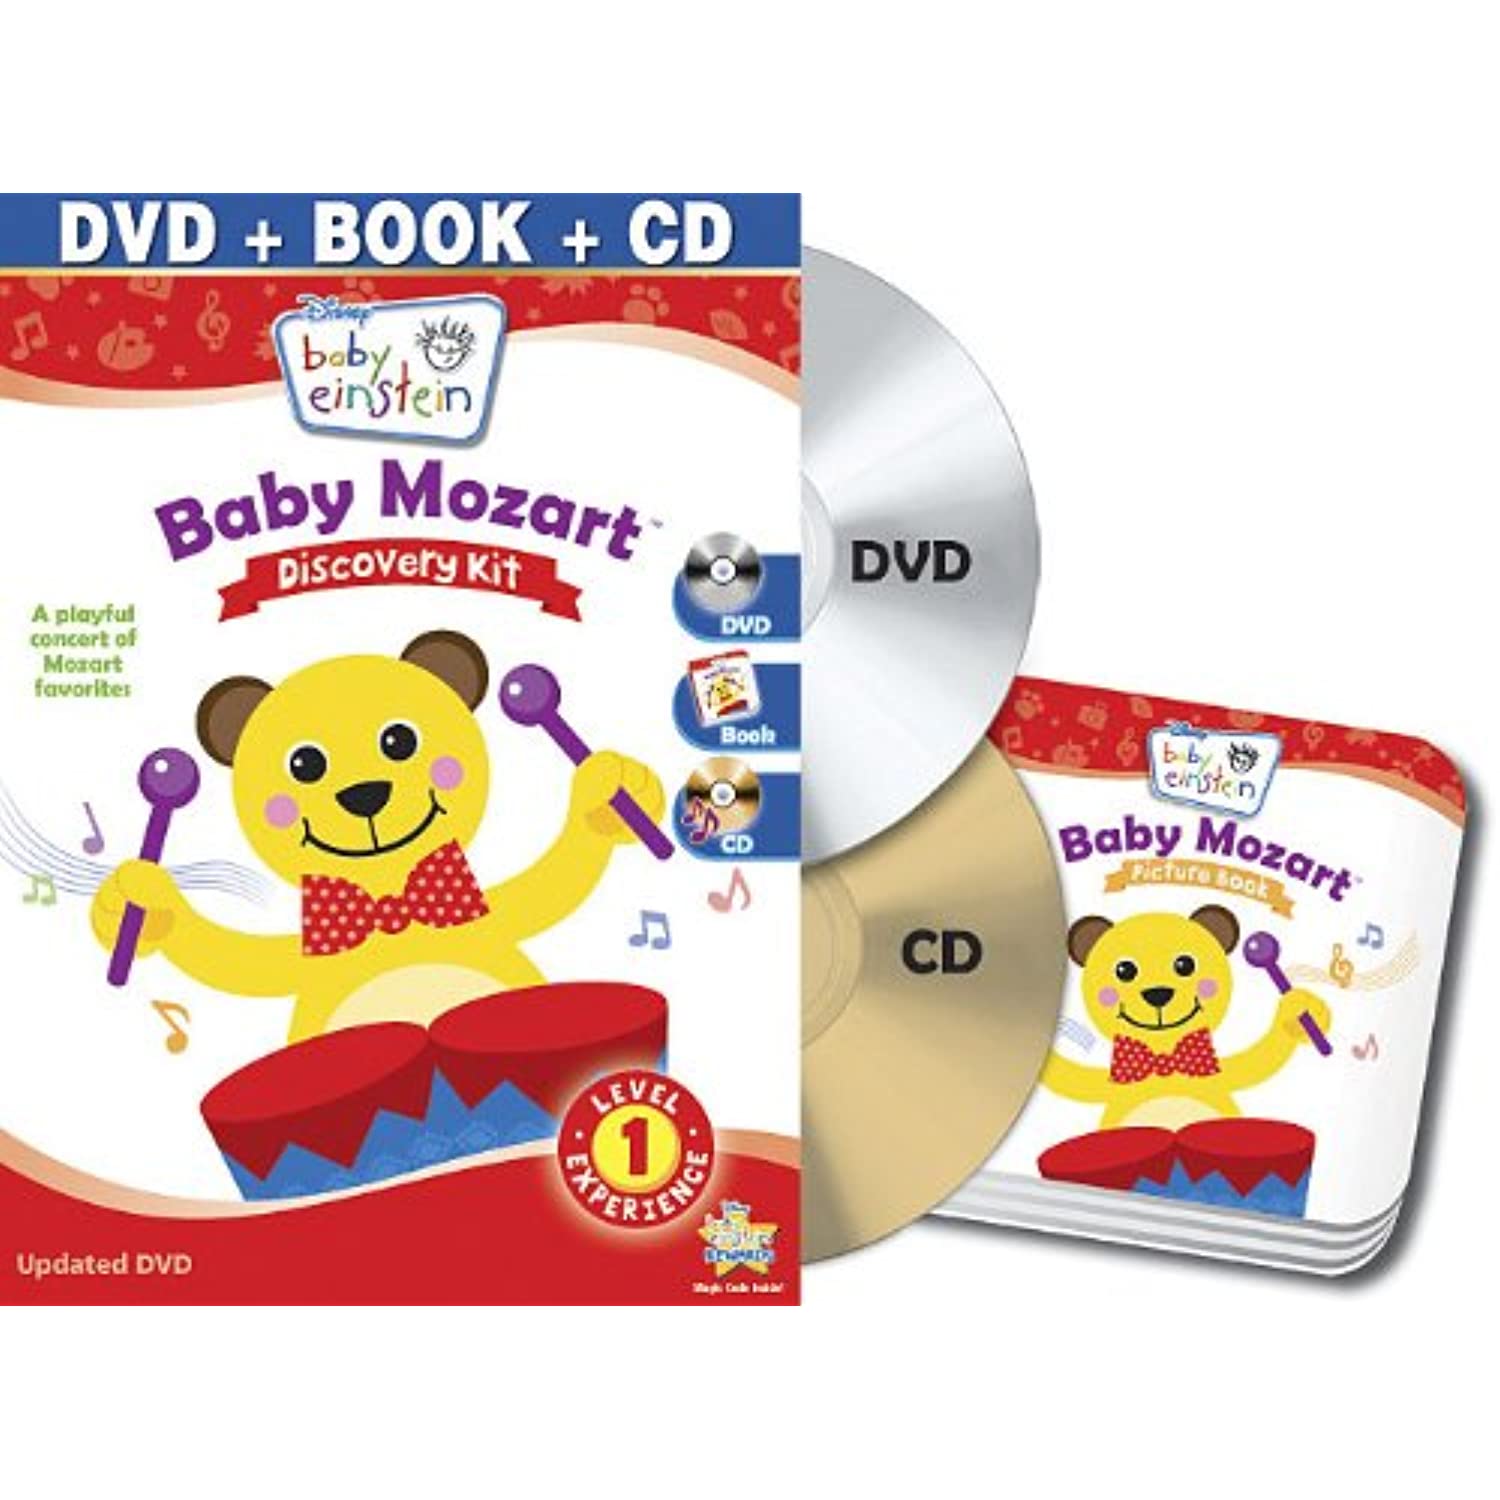 Baby mozart discovery kit